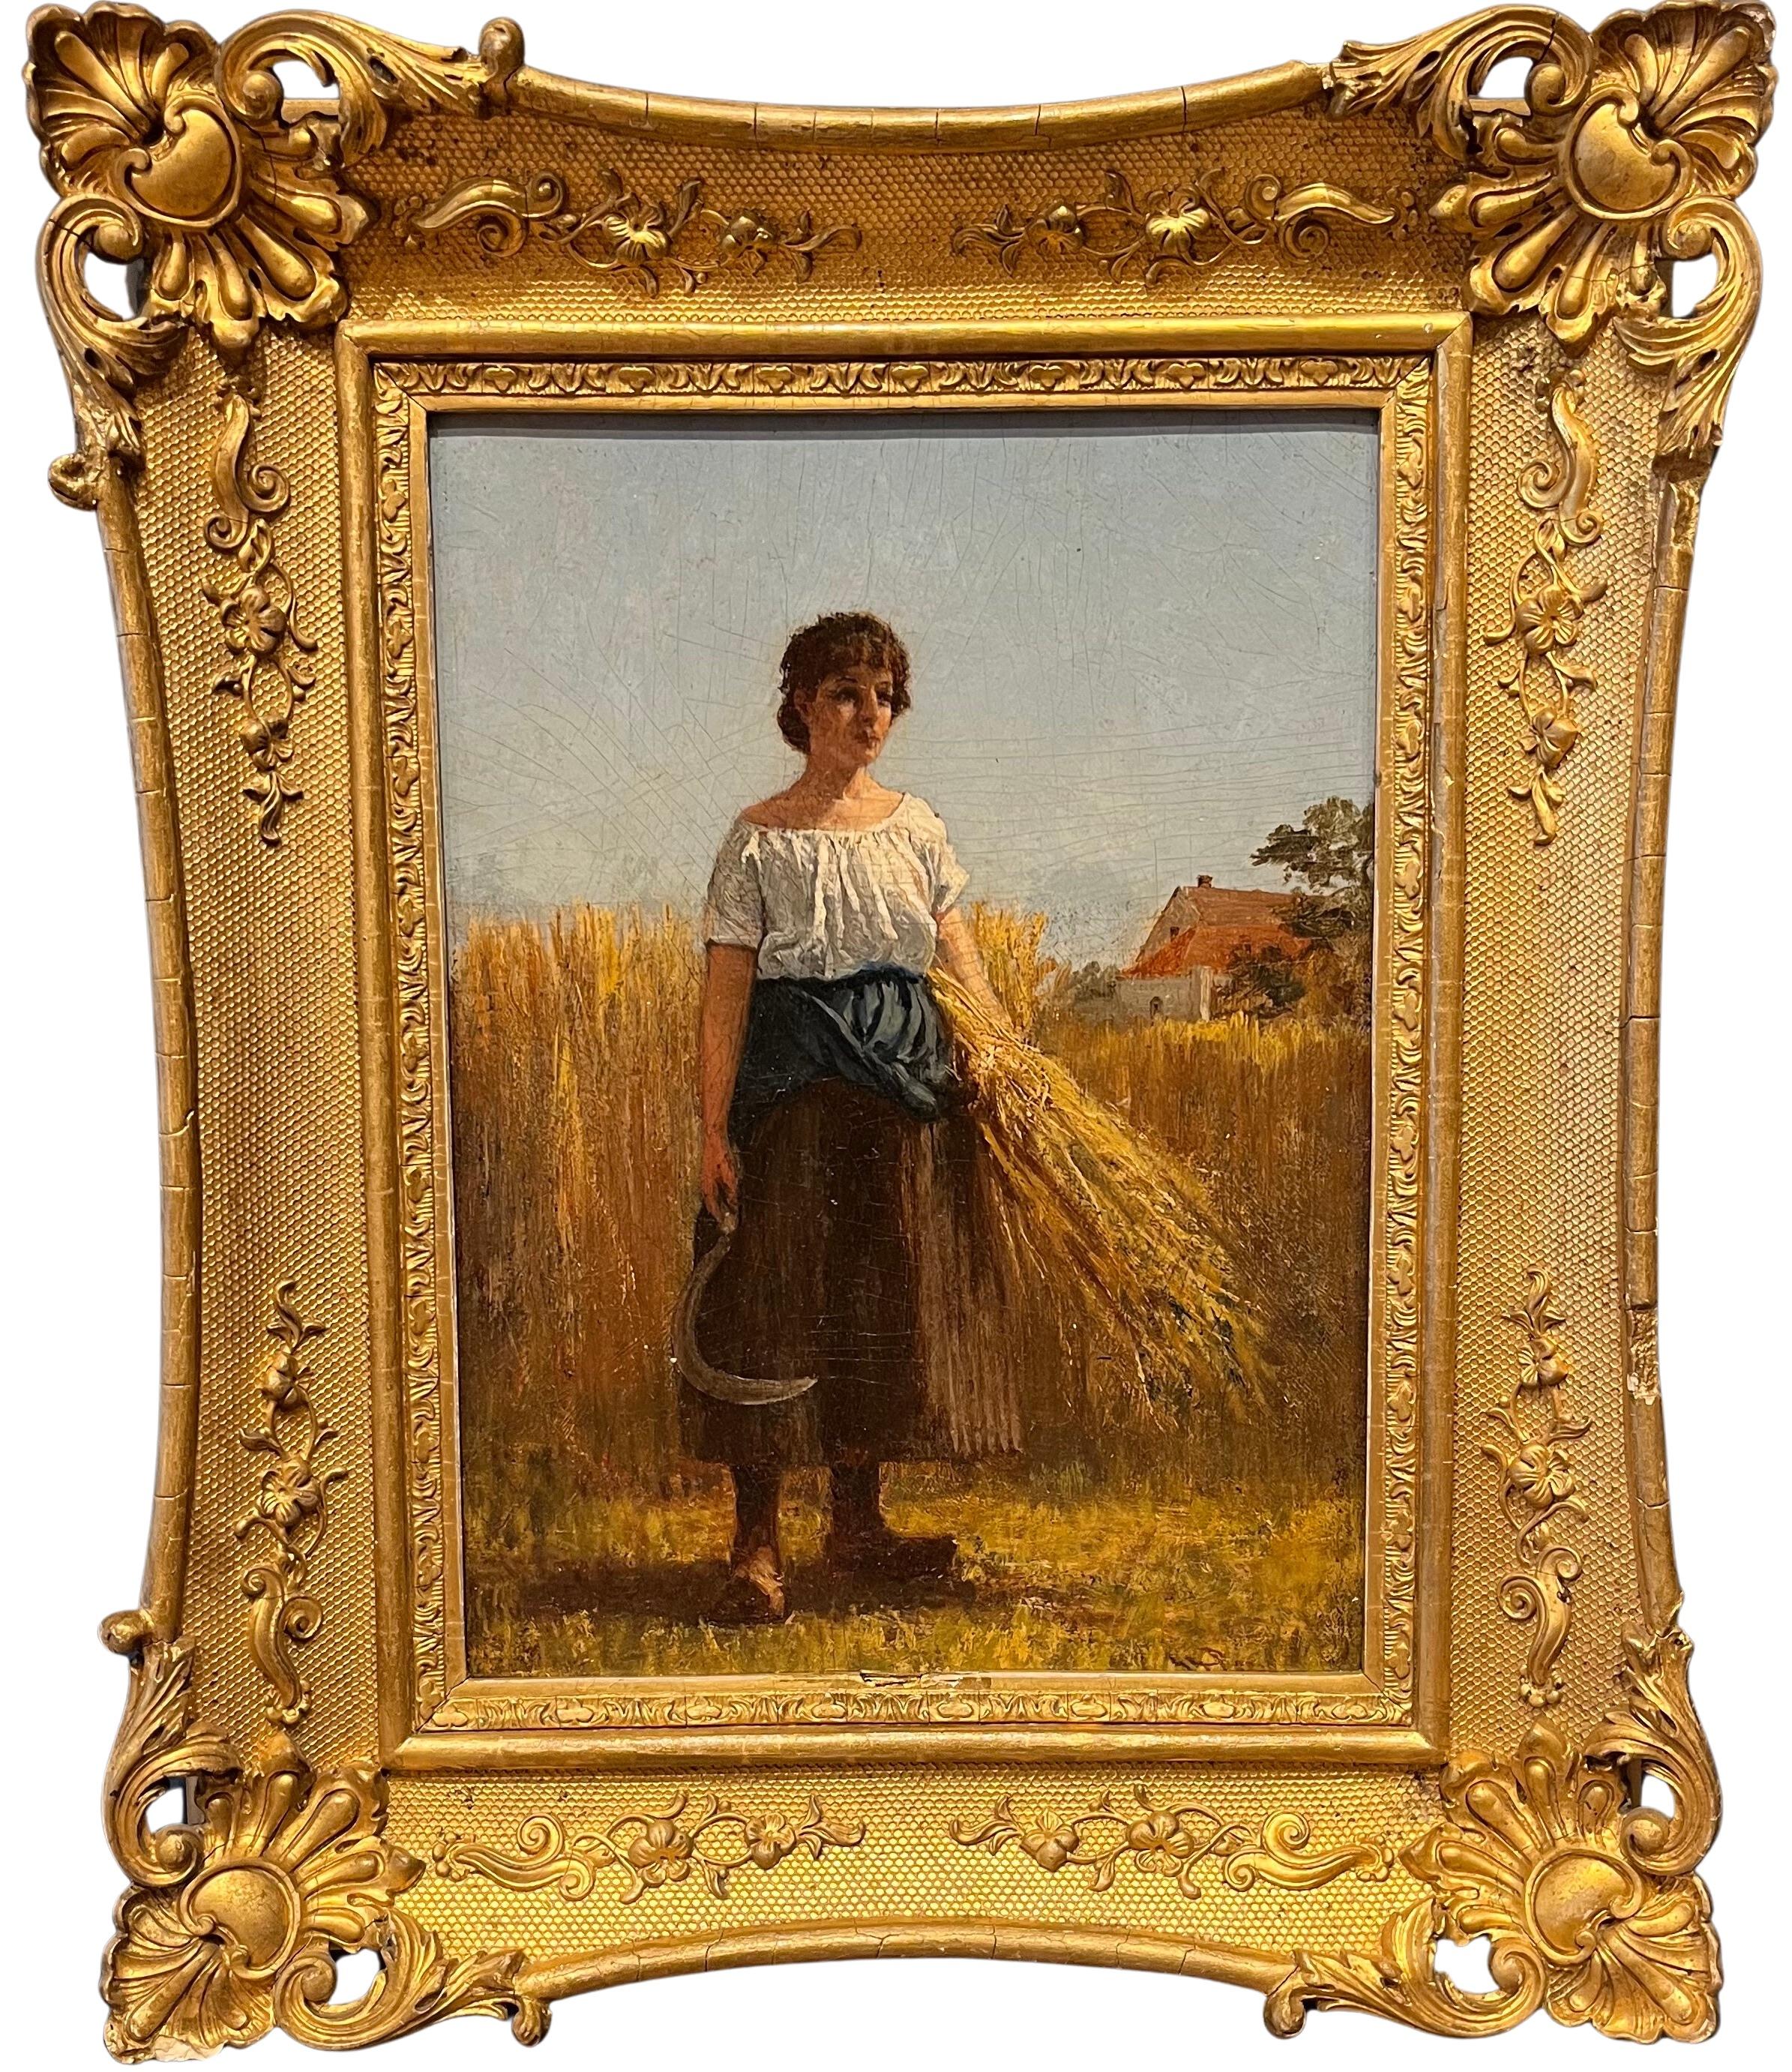 William Hicok Low Portrait Painting - Oil Portrait of Woman in Wheat Field